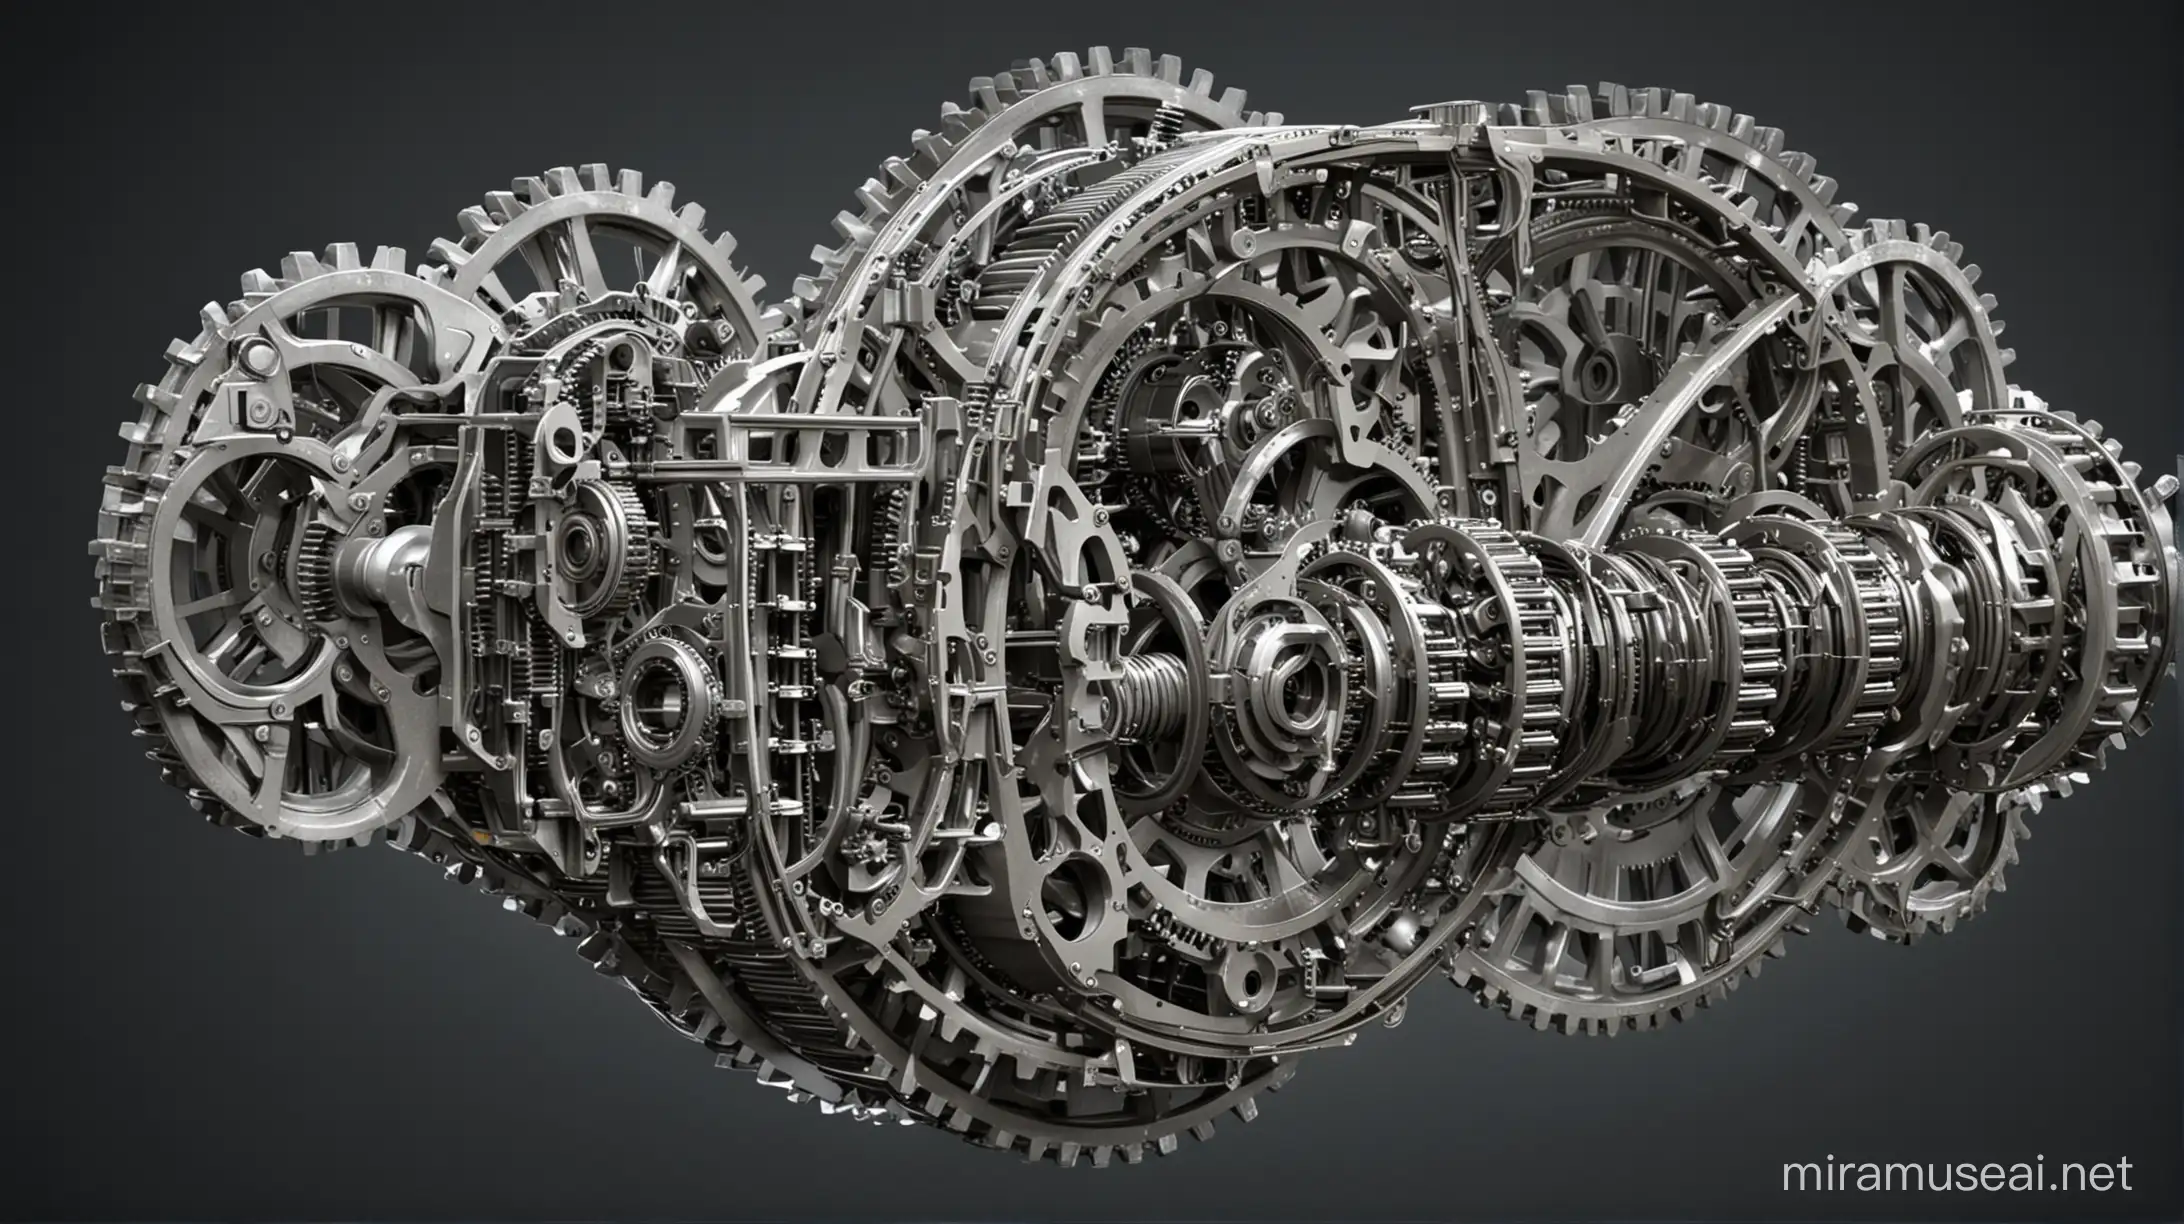  Refined machine depicts a refined machine. The machine is now made up of a smaller number of parts, but they are all connected in a very efficient way. The gears are all perfectly meshed together, and the machine is now very powerful.
